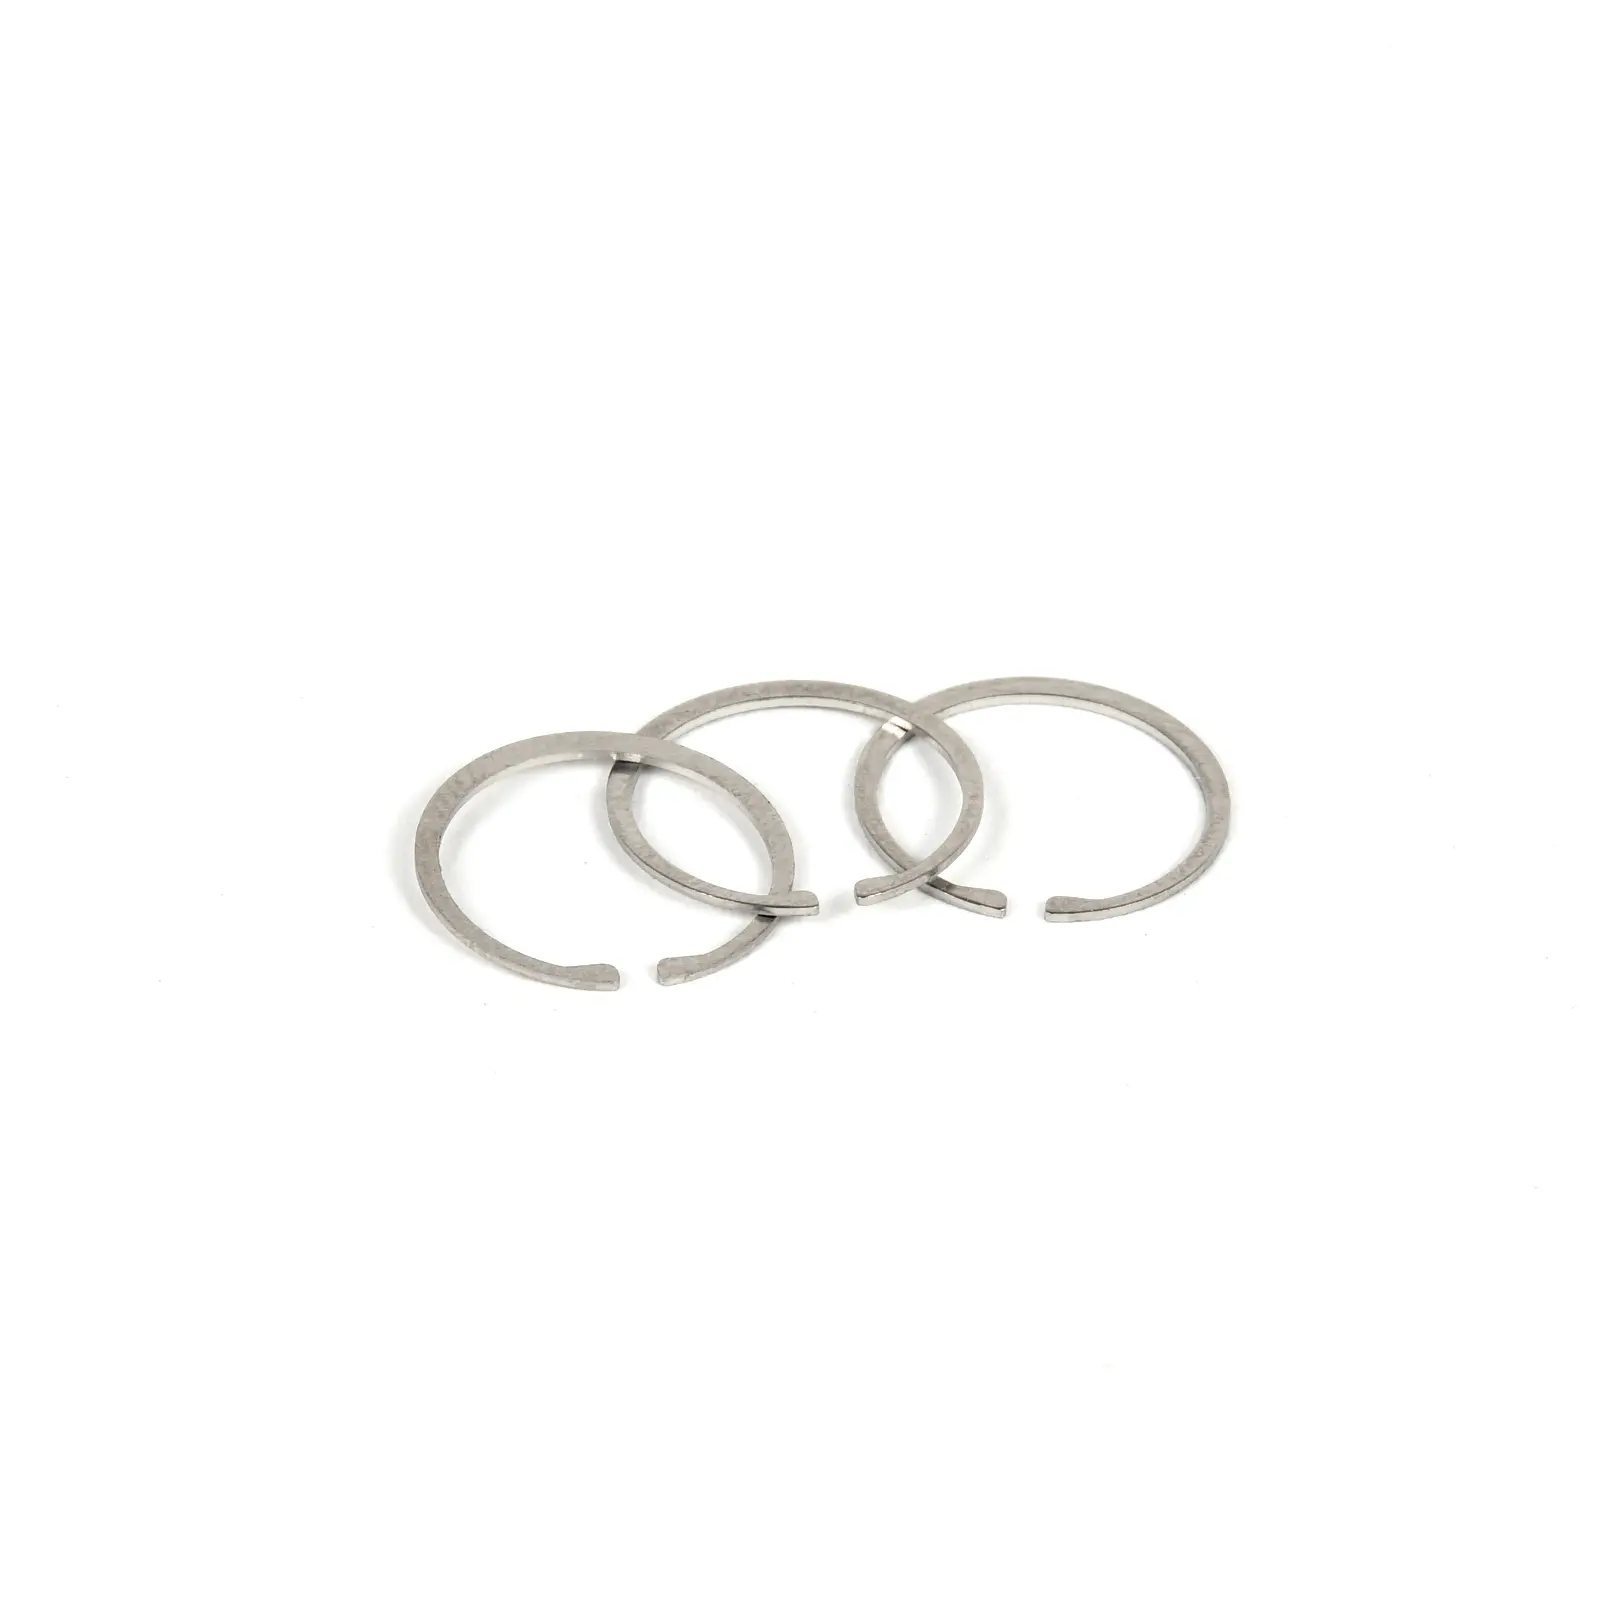 AT3 Tactical Gas Rings for AR15 Bolts – Set of 3